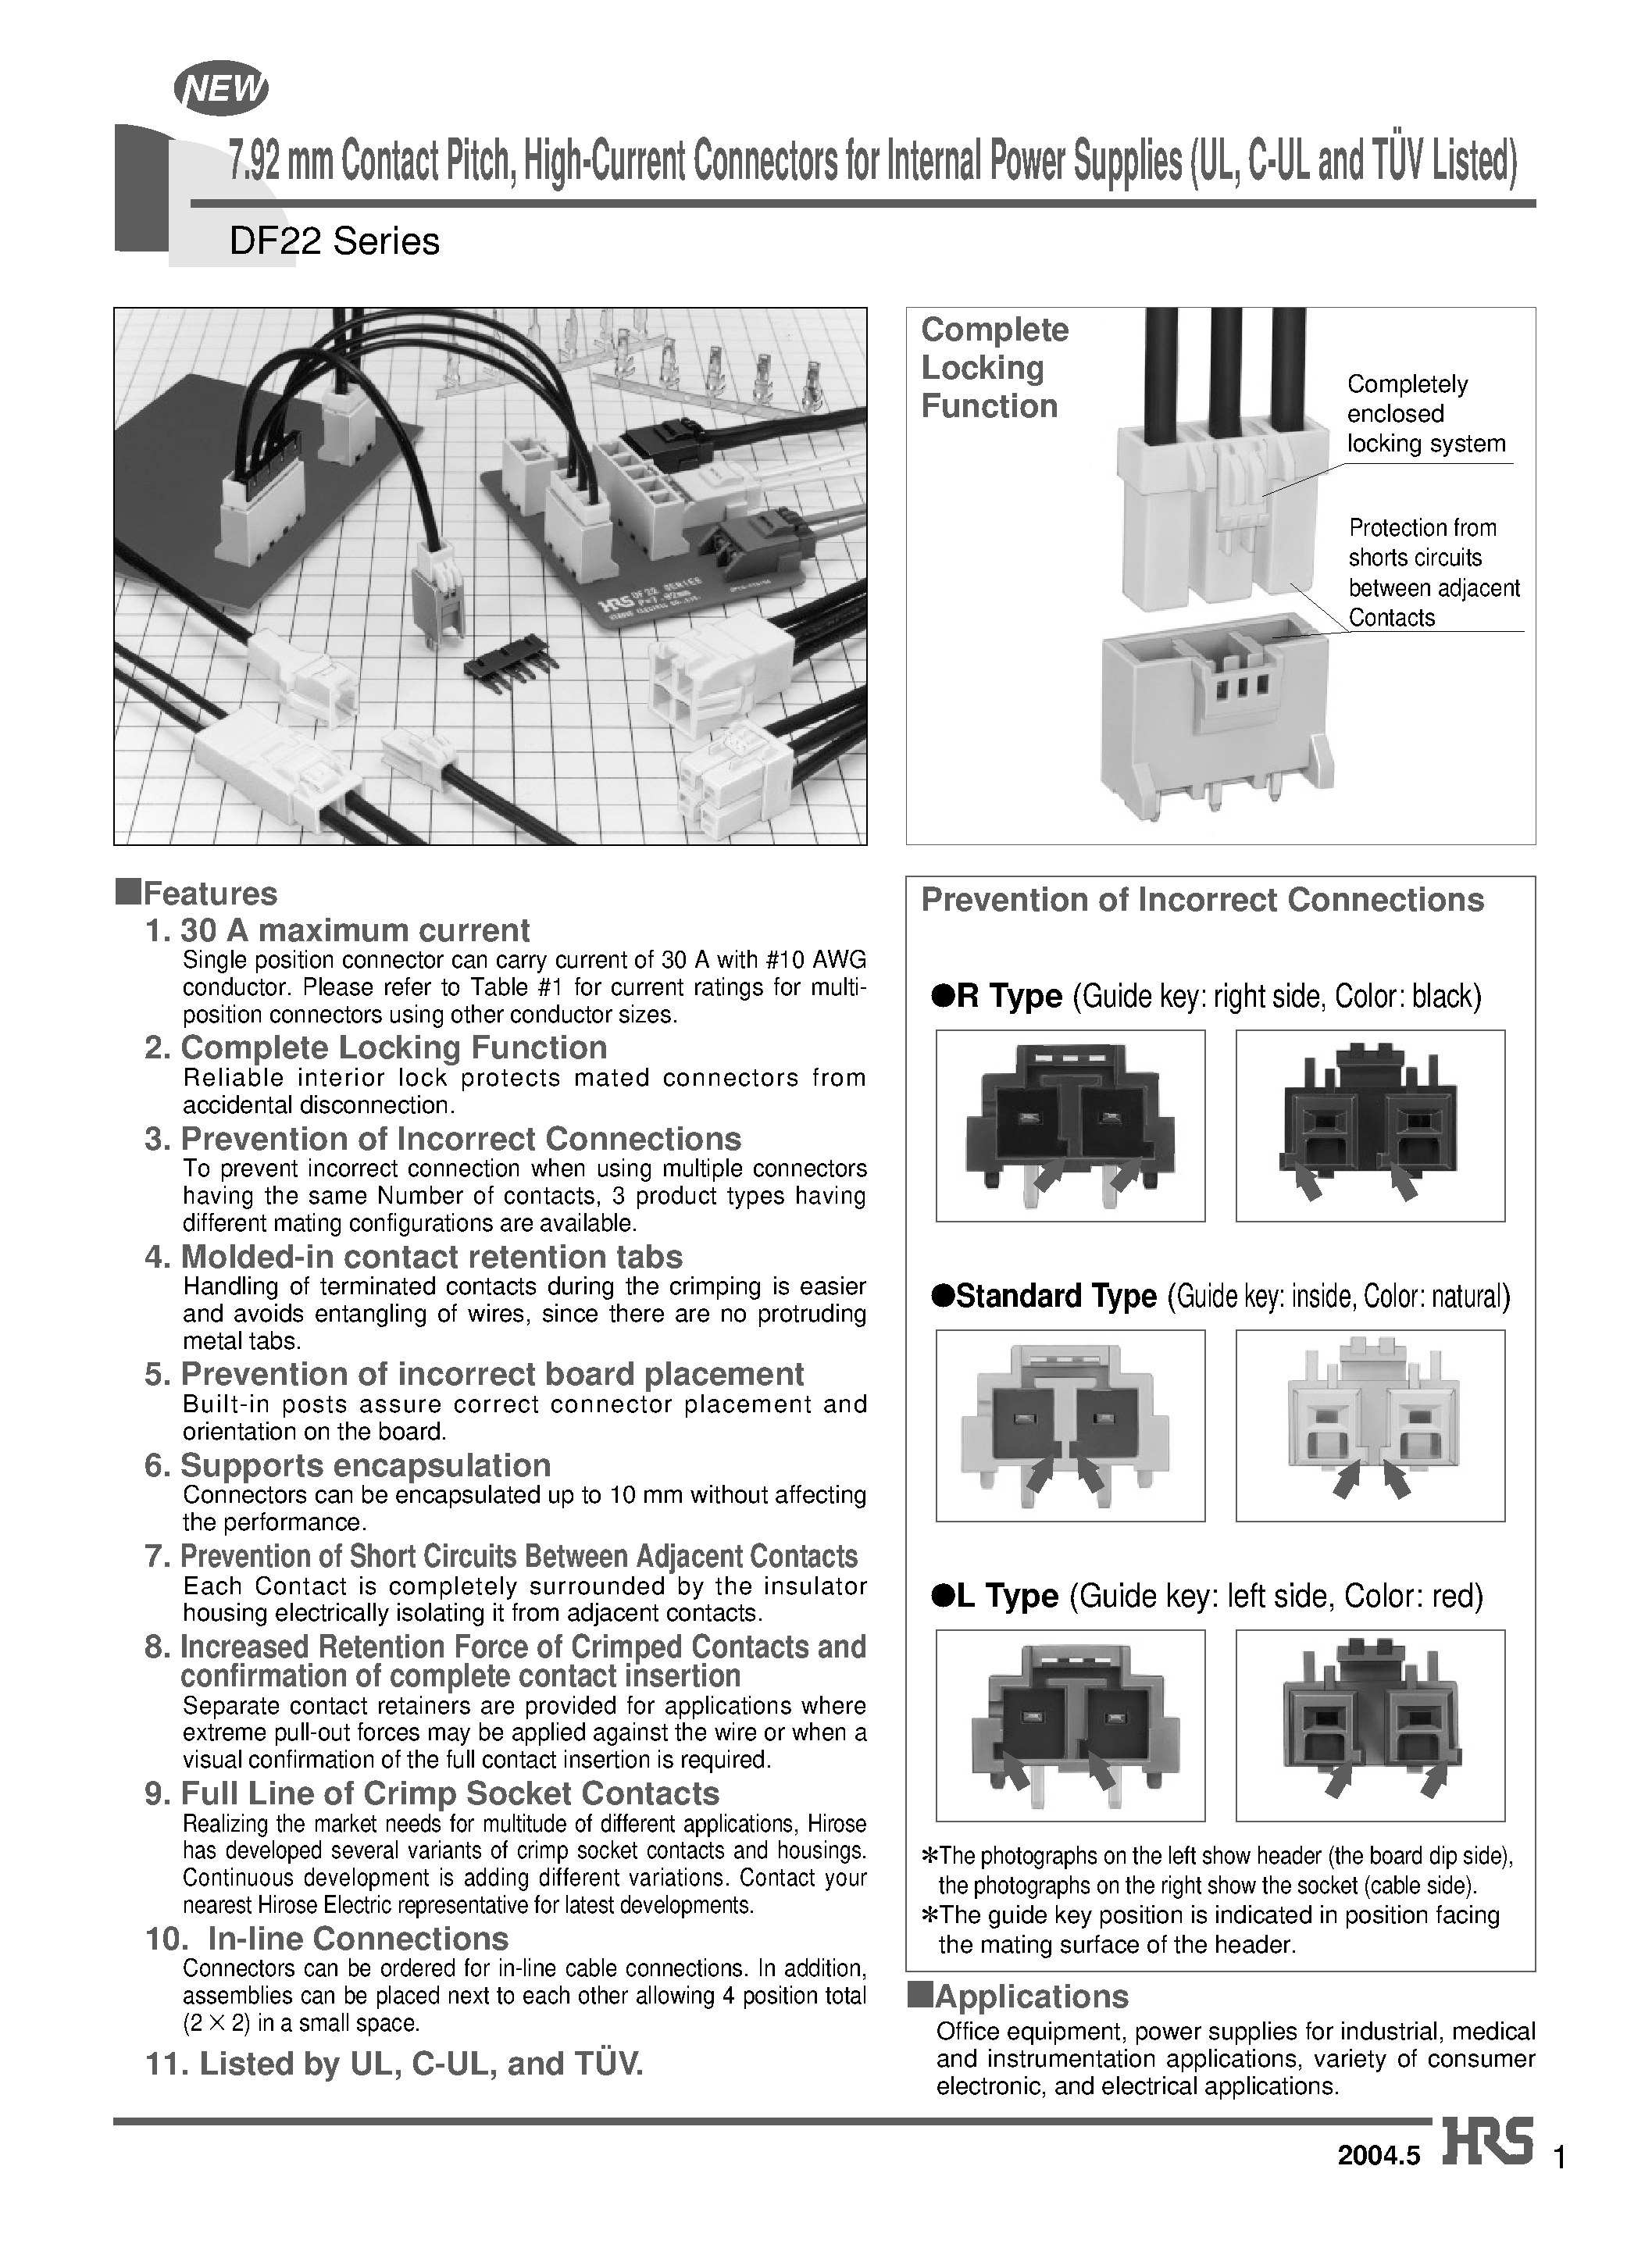 Даташит DF22AL-3DS-7.92DSA - 7.92 mm Contact Pitch/ High-Current Connectors for Internal Power Supplies (UL/ C-UL and TUV Listed) страница 1